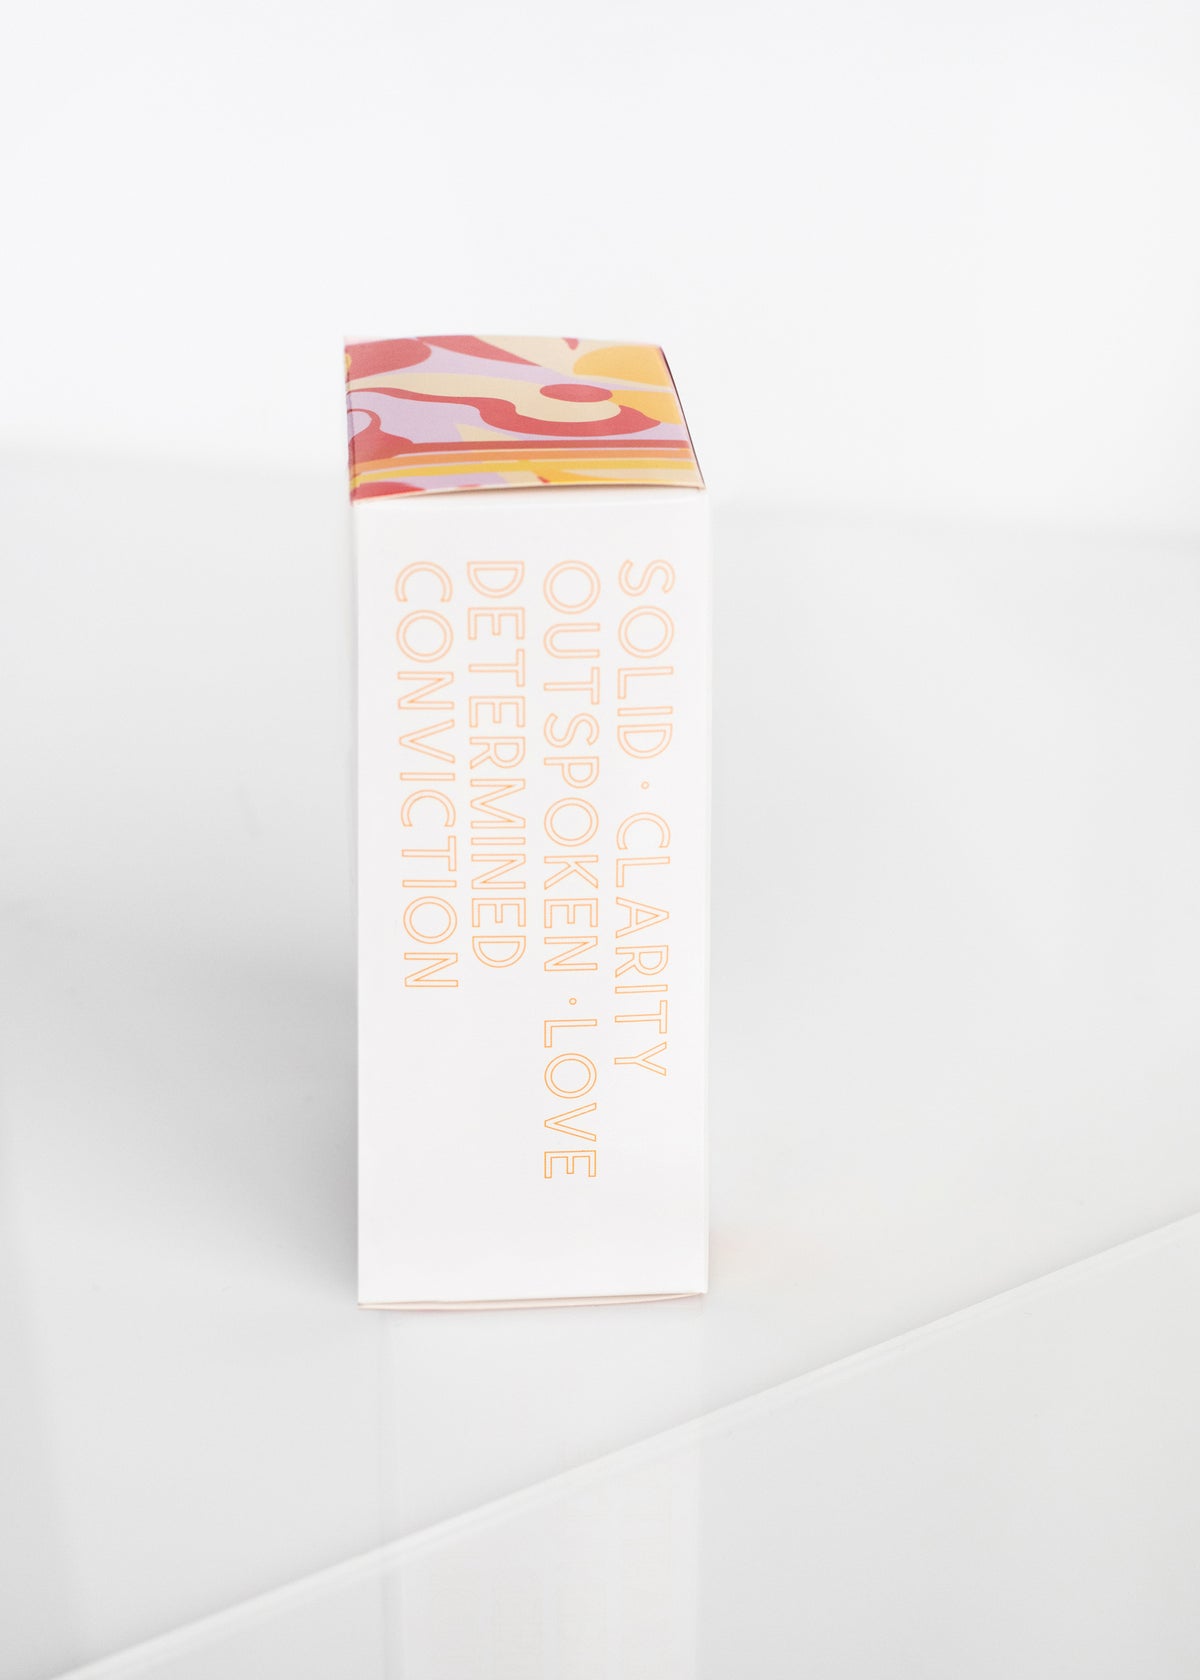 A slim box stands on a bright white surface, displaying Margot Elena's Infinite She Empowered Eau de Parfum in black text, complemented by colorful abstract art with hints of orange blossom.